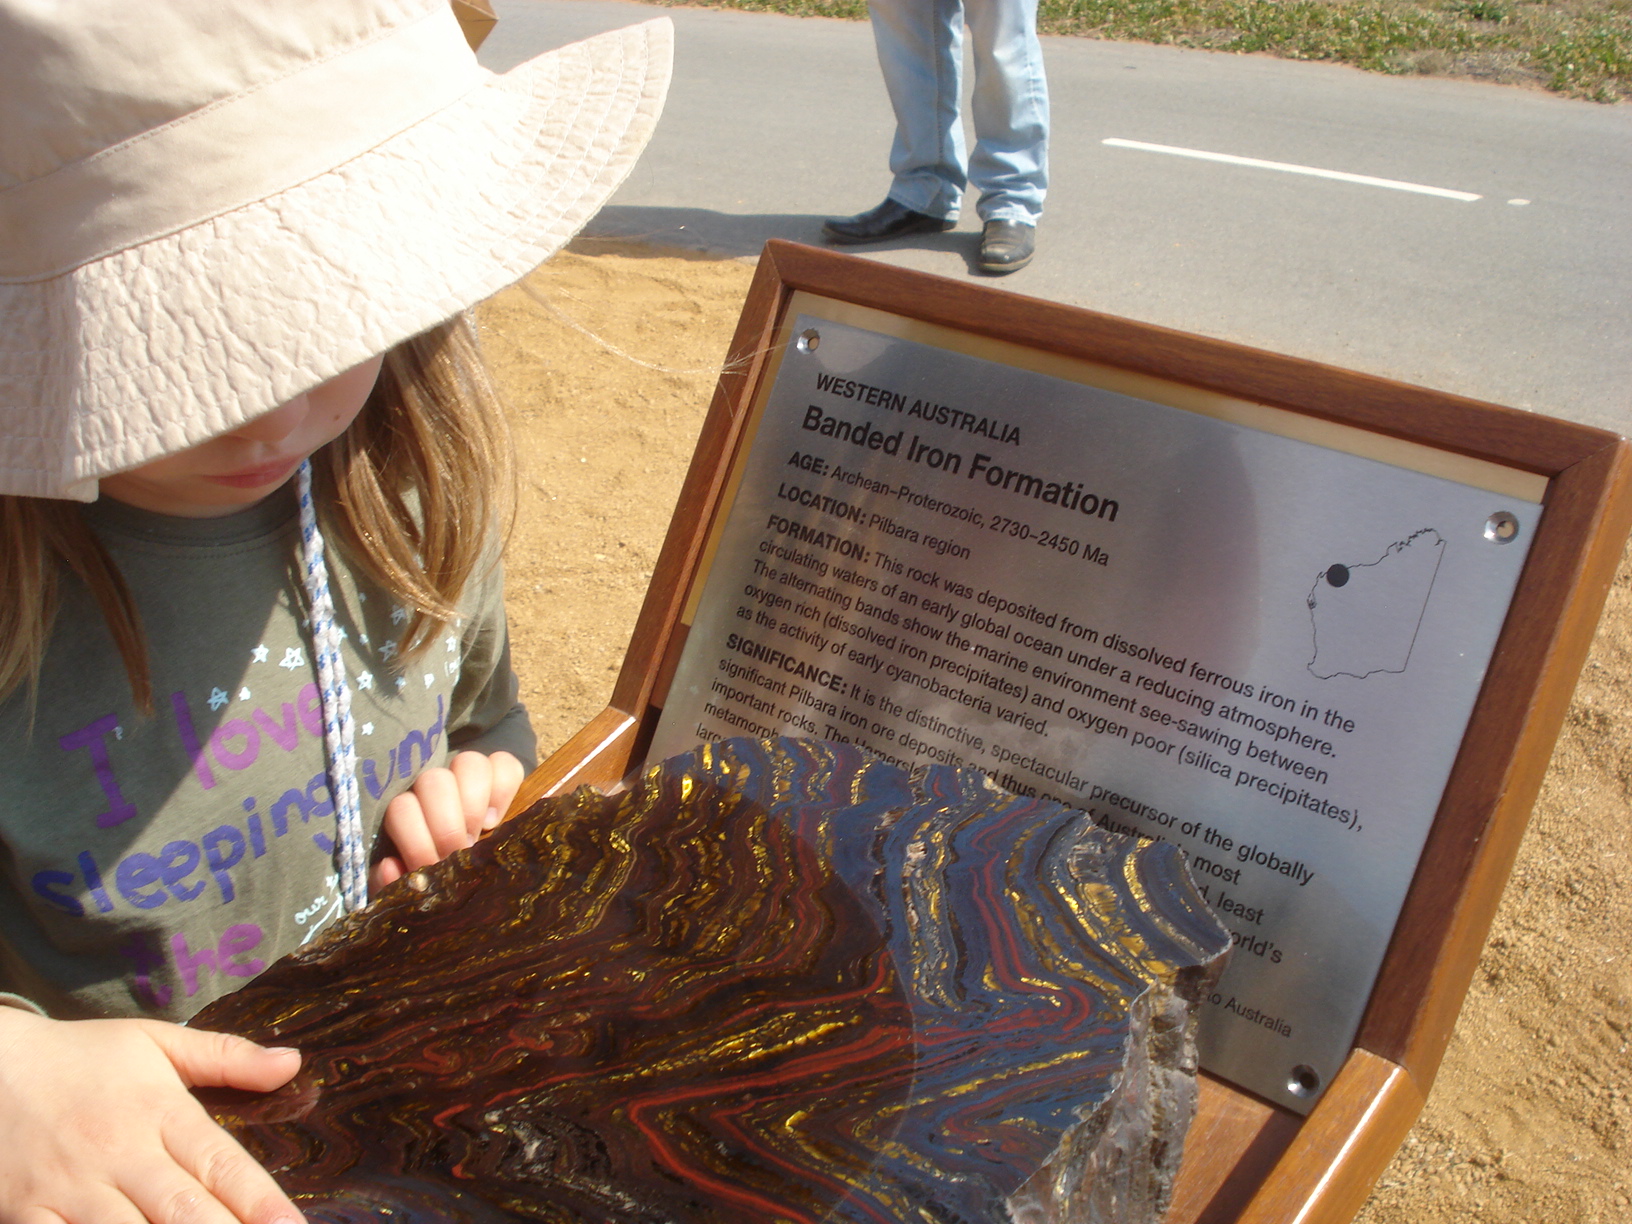 A young visitor admires the polished Banded Iron Formation from the Archaean period in the Pilbara. The Western Australian monolith is still wending its way across the continent but Geoscience Australia stepped into the breach with this stunning specimen to complete the series for the event. 